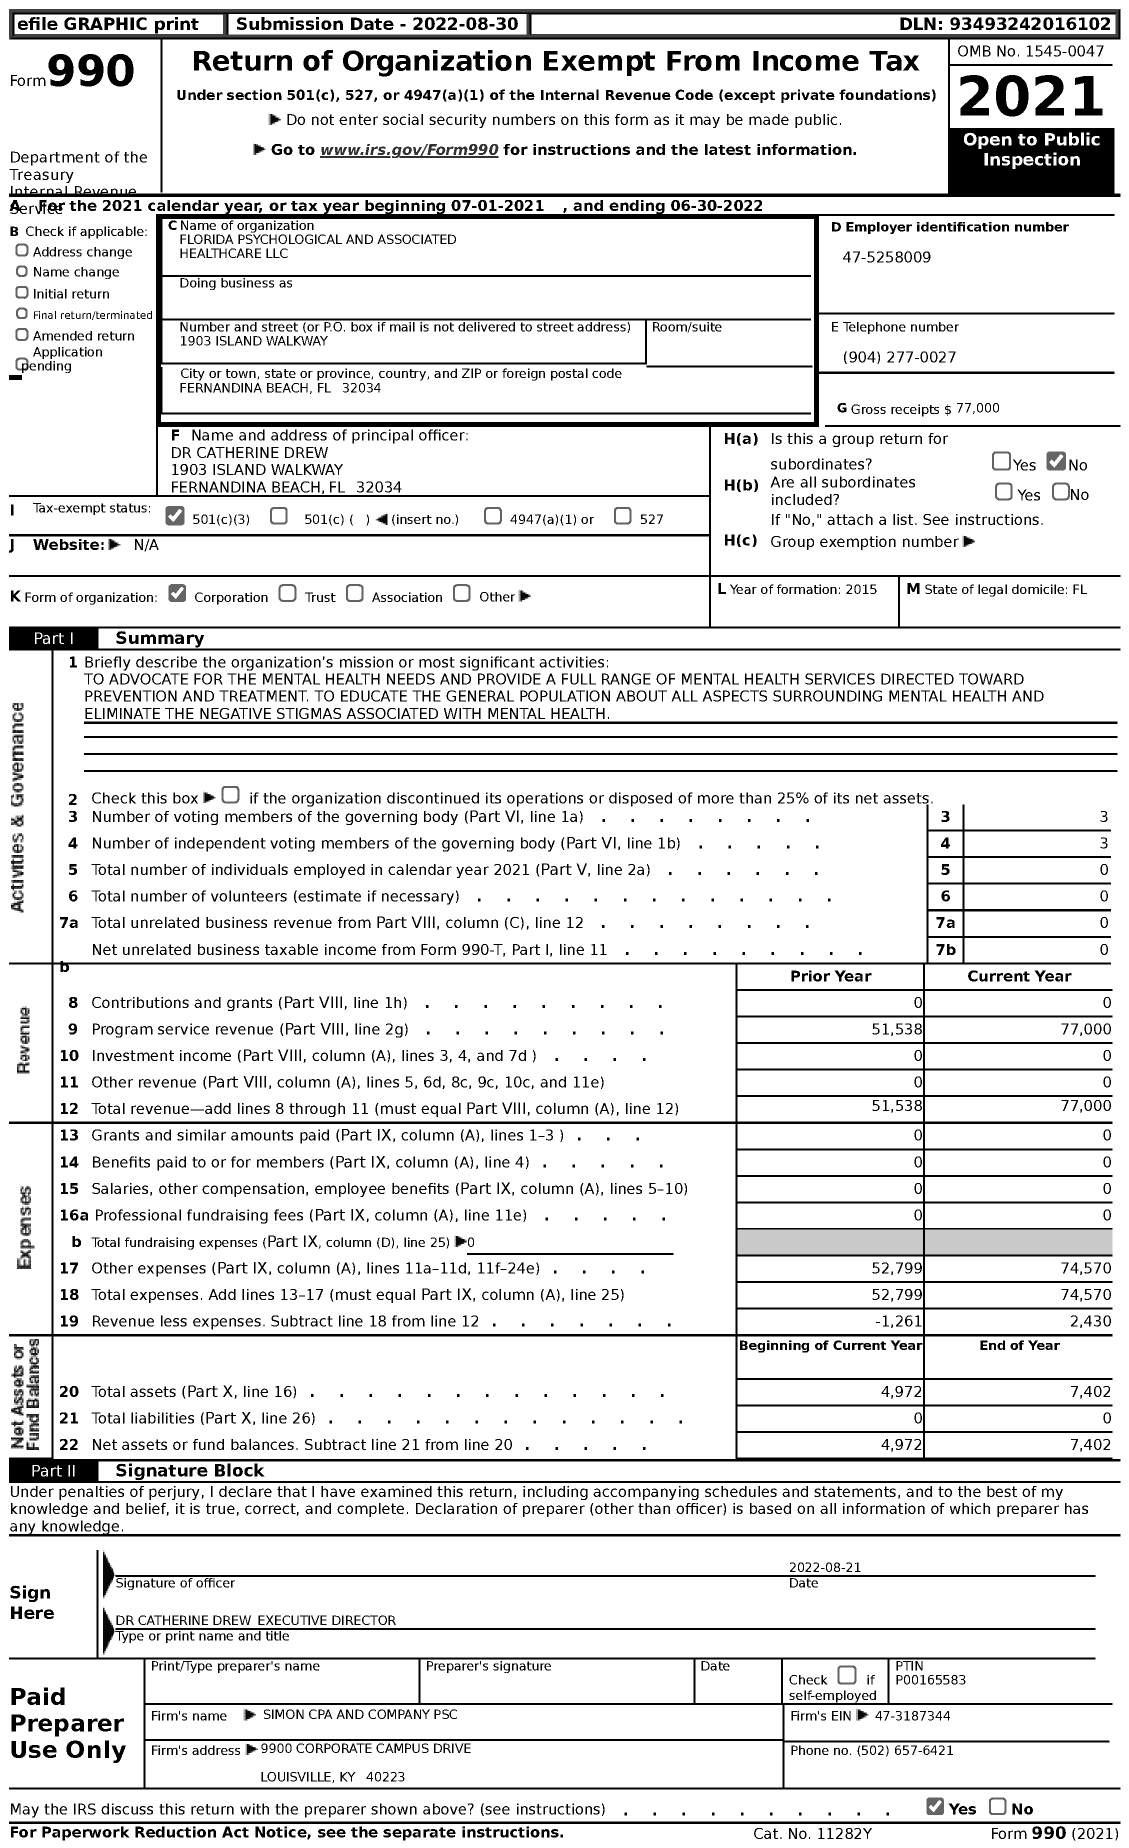 Image of first page of 2021 Form 990 for Florida Psychological and Associated Healthcare LLC